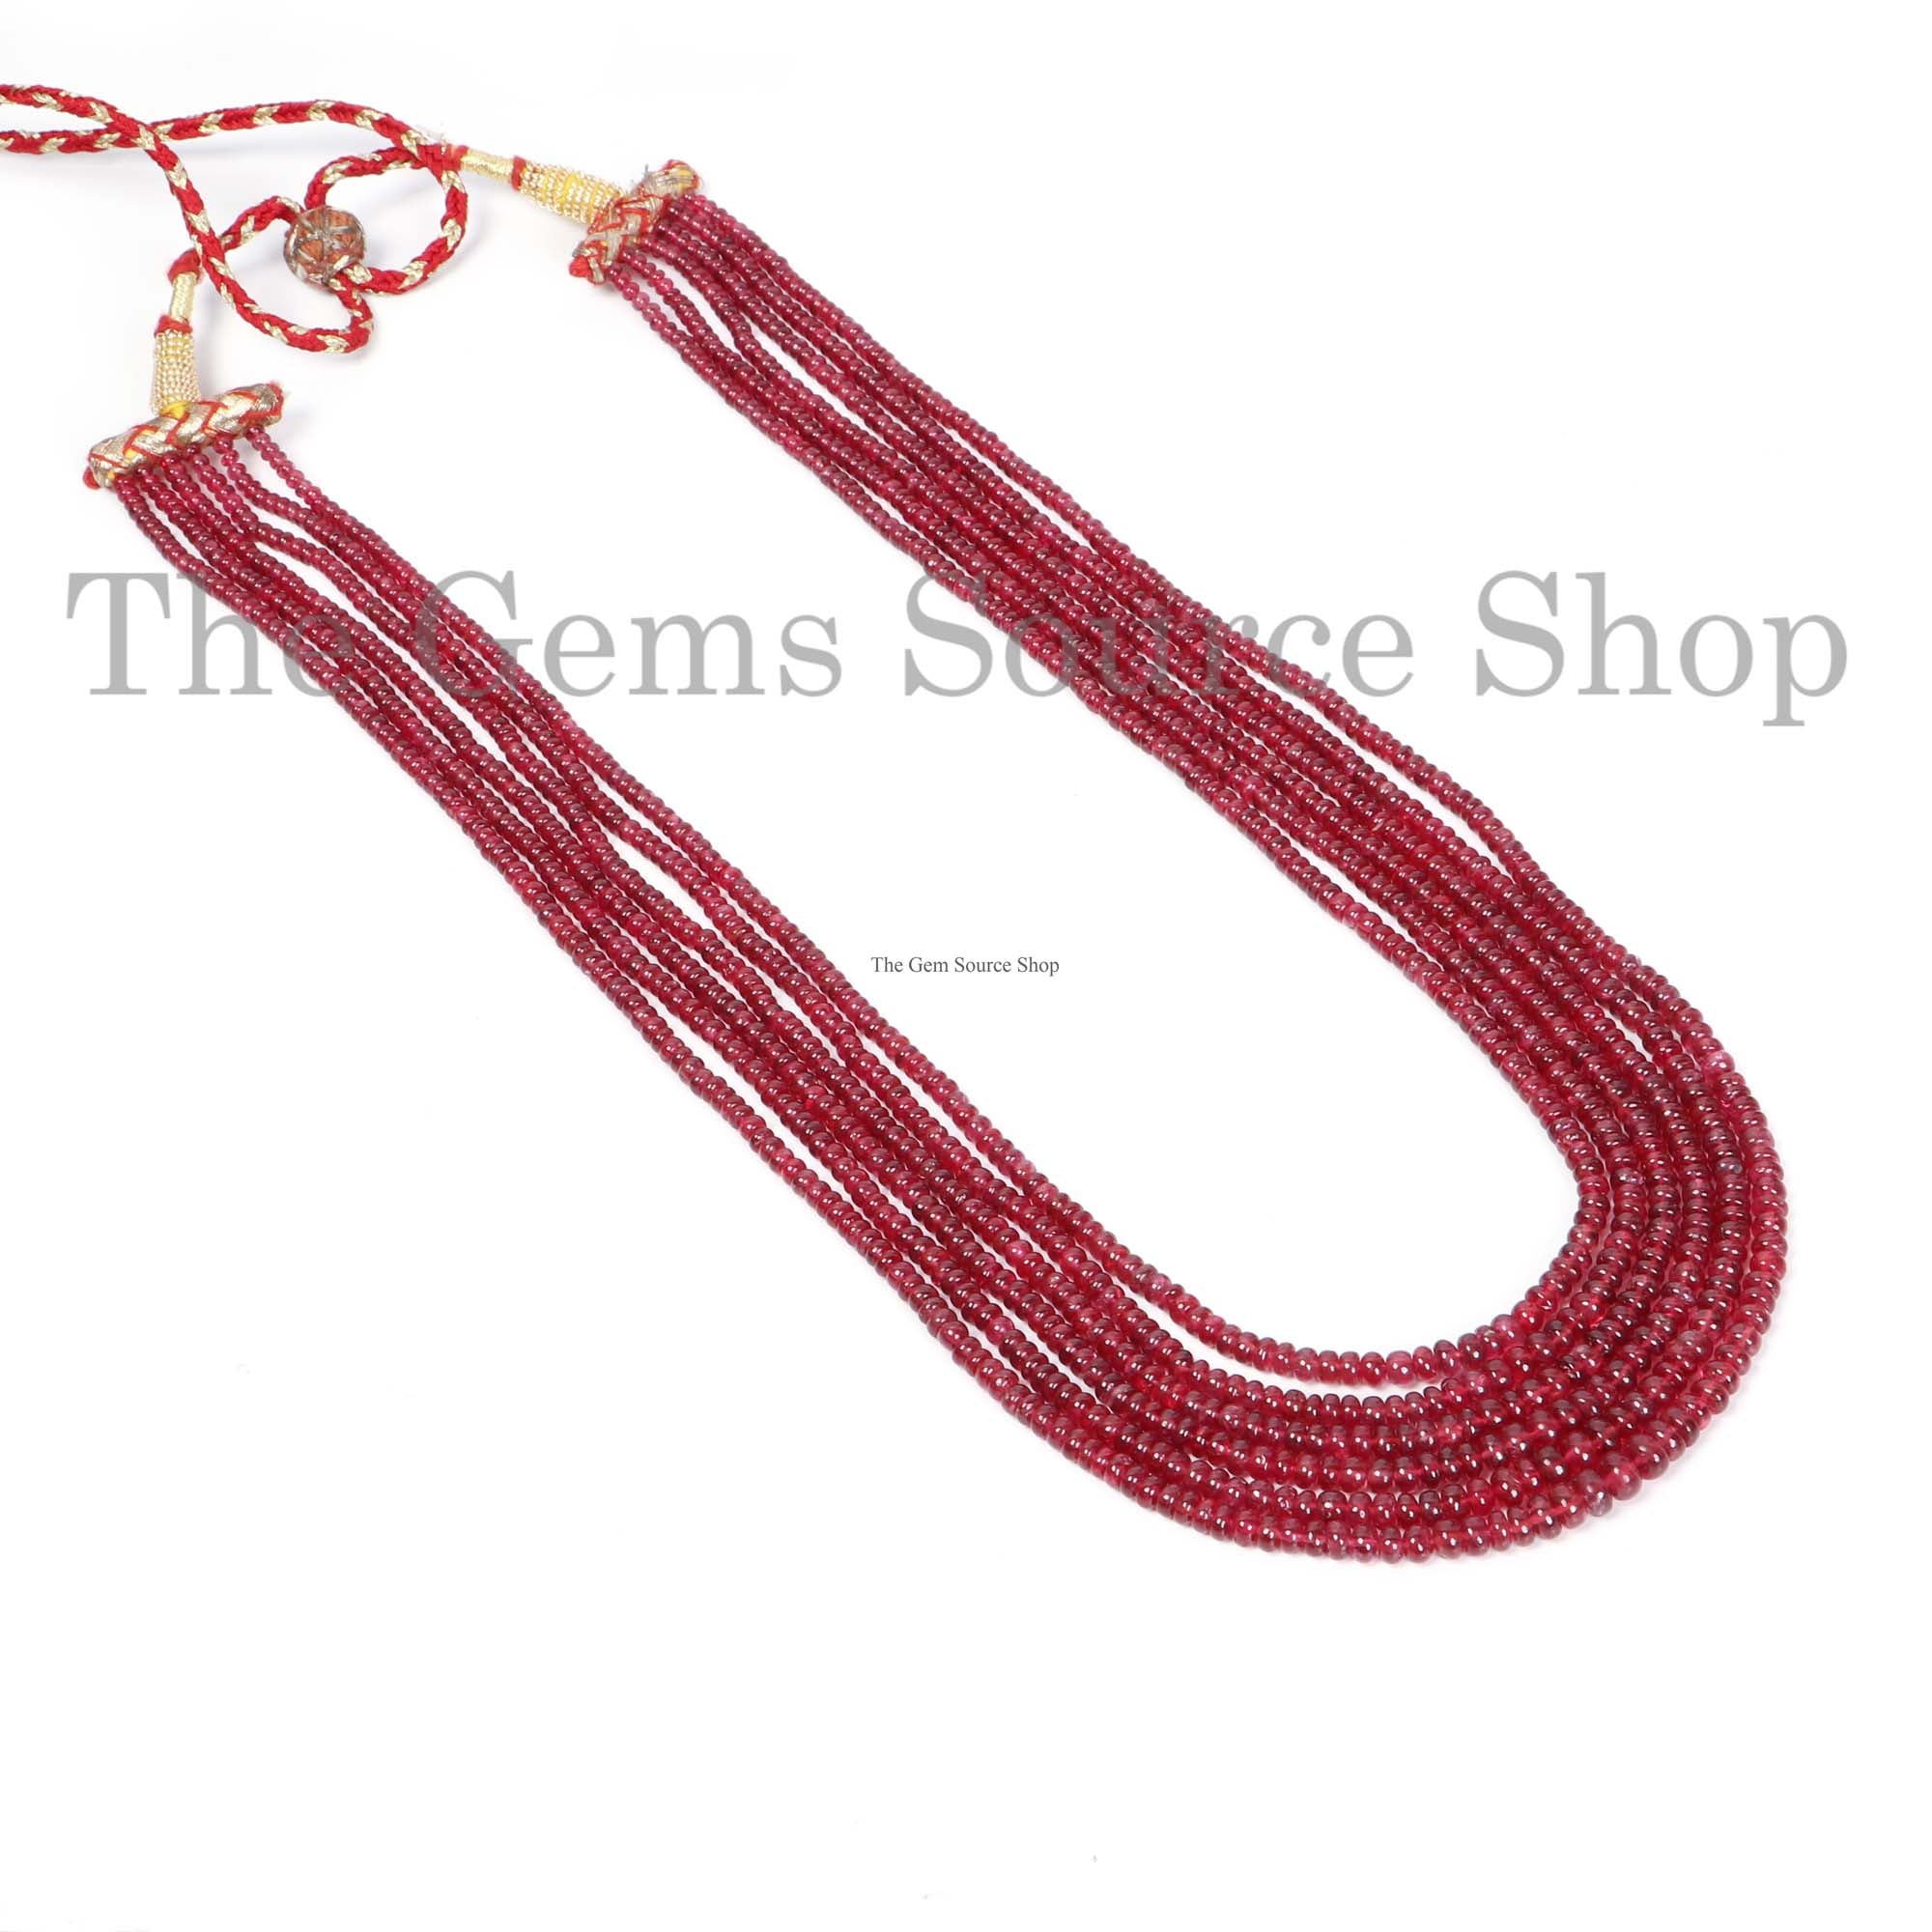 Top Quality Red Spinel Necklace, Smooth Rondelle Beads Necklace, 6 Line Necklace Set, Gemstone Jewelry